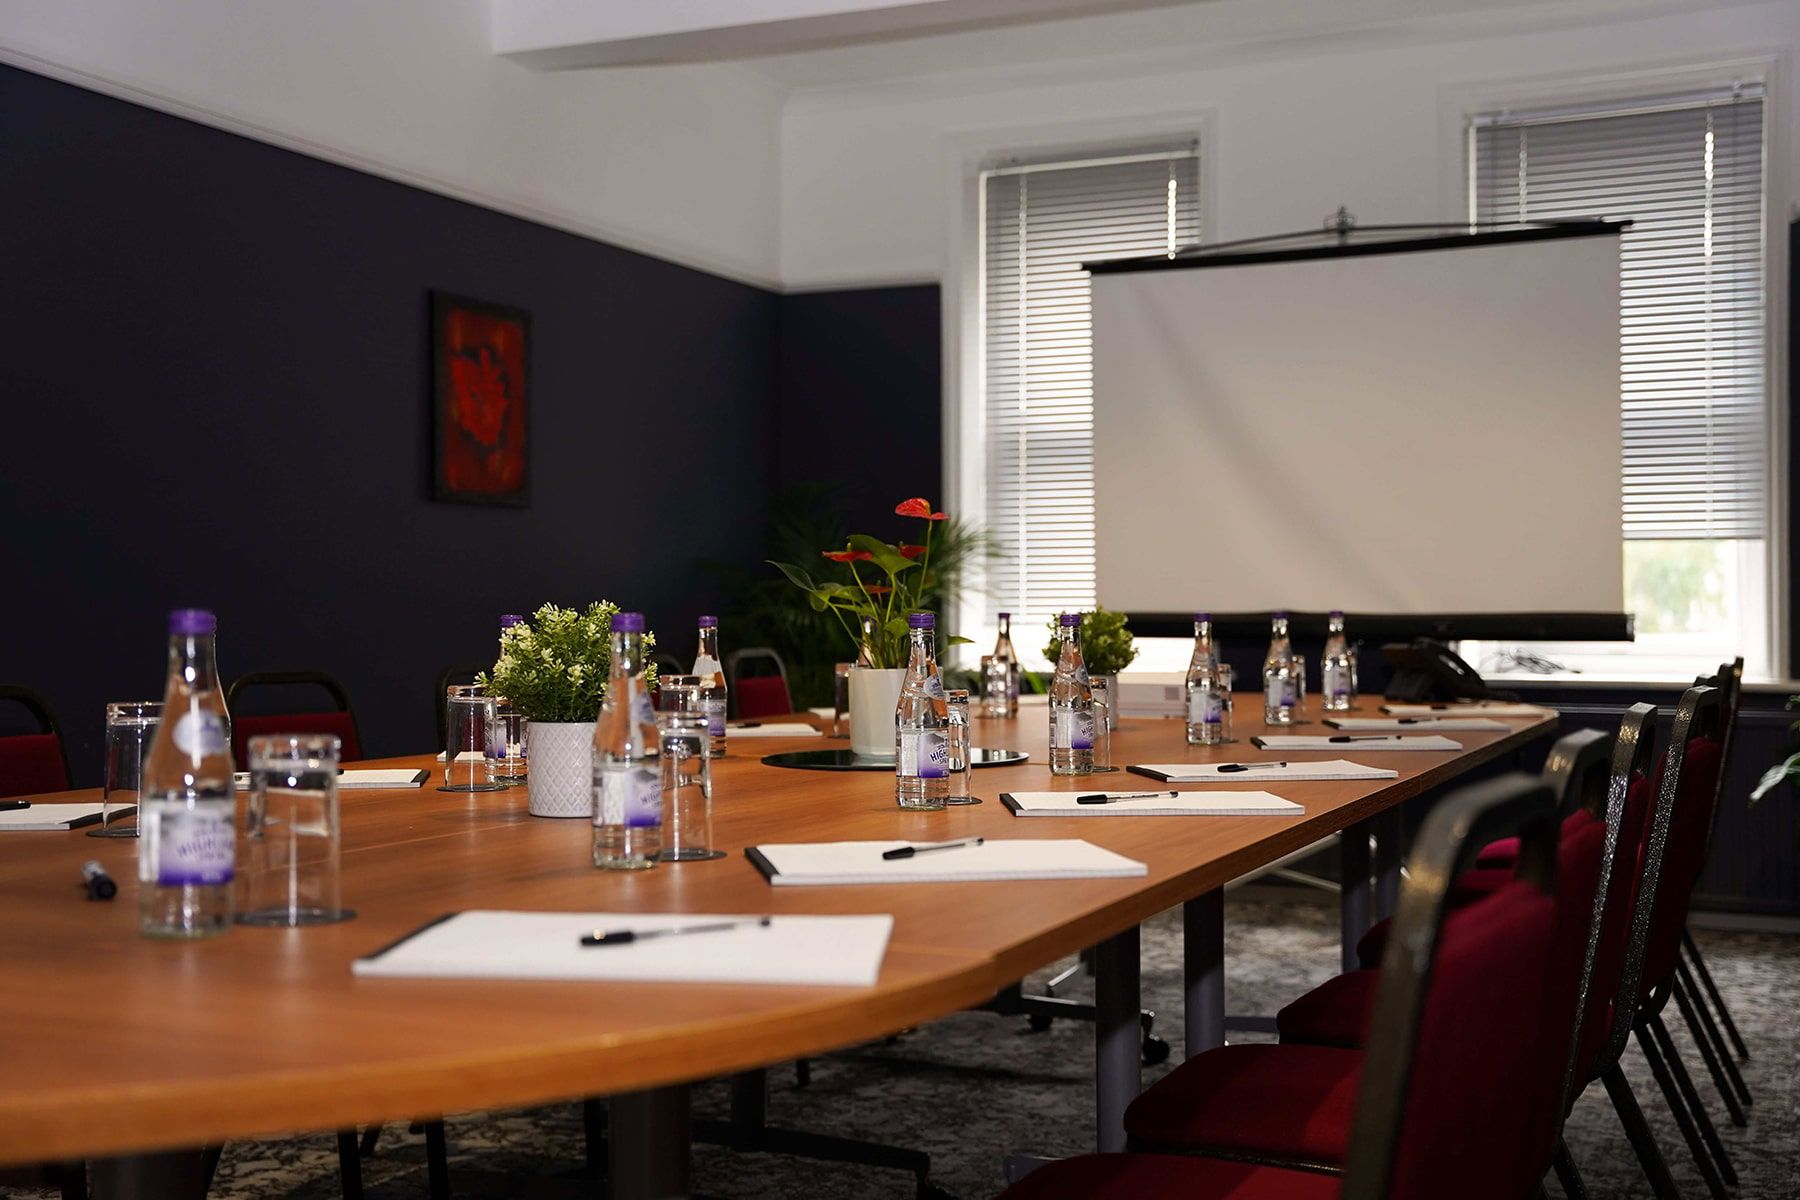 Hamlet Maidstone - 5 Conference Venues in Maidstone That Will Impress Your Clients: Discover Hamlet Hotels Maidstones Meeting Facilities 1